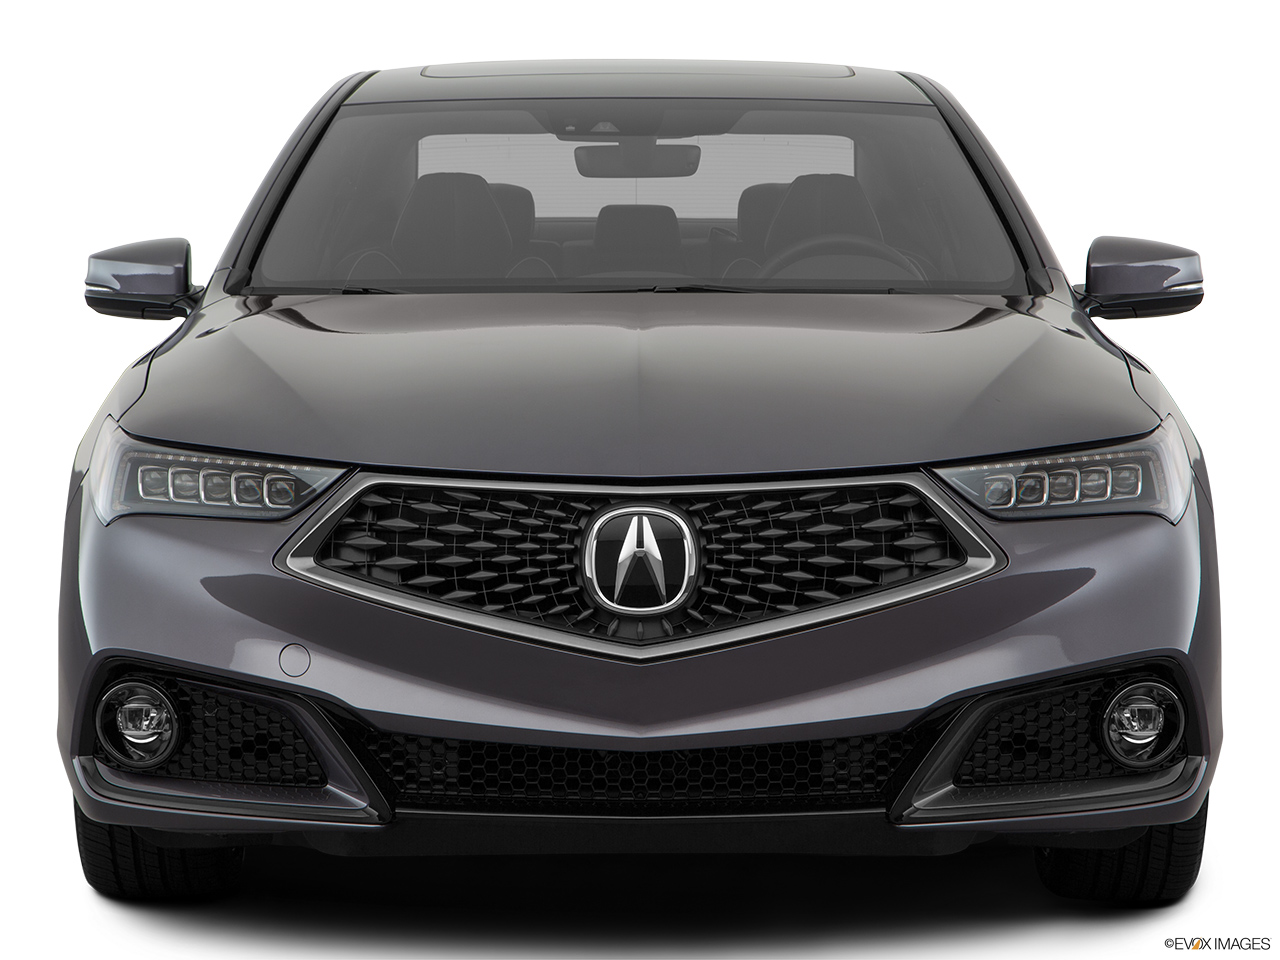 2019 Acura TLX 3.5L Low/wide front. 